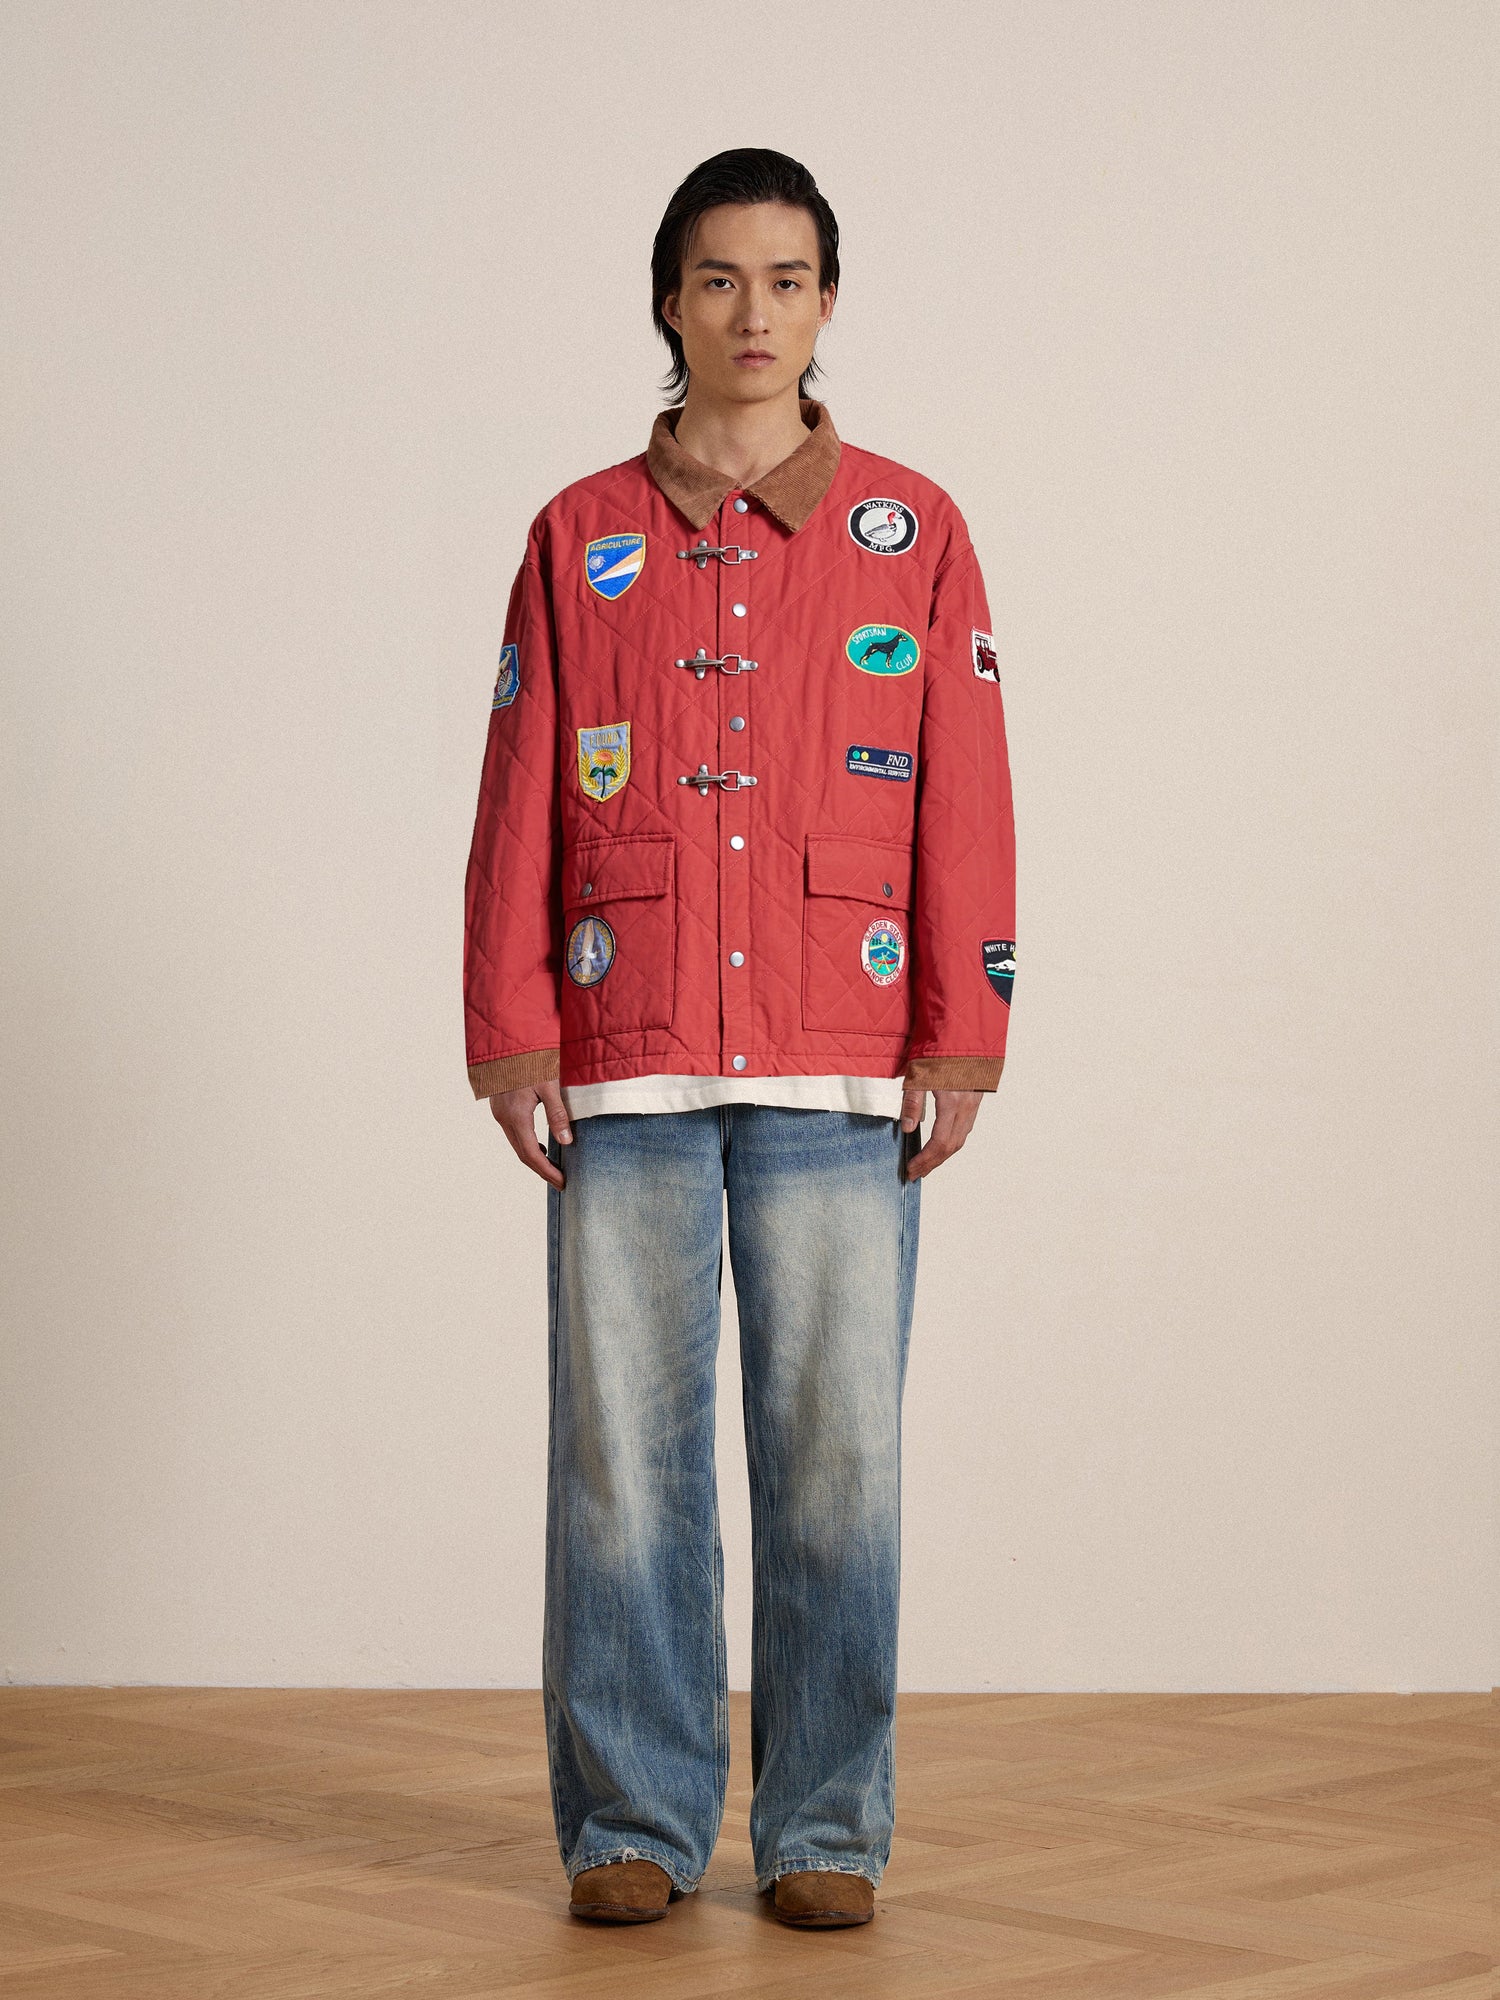 A person with long hair stands facing forward, wearing a red Farmstead Quilt Patch Jacket by Found and wide-leg blue jeans, against a plain indoor backdrop.